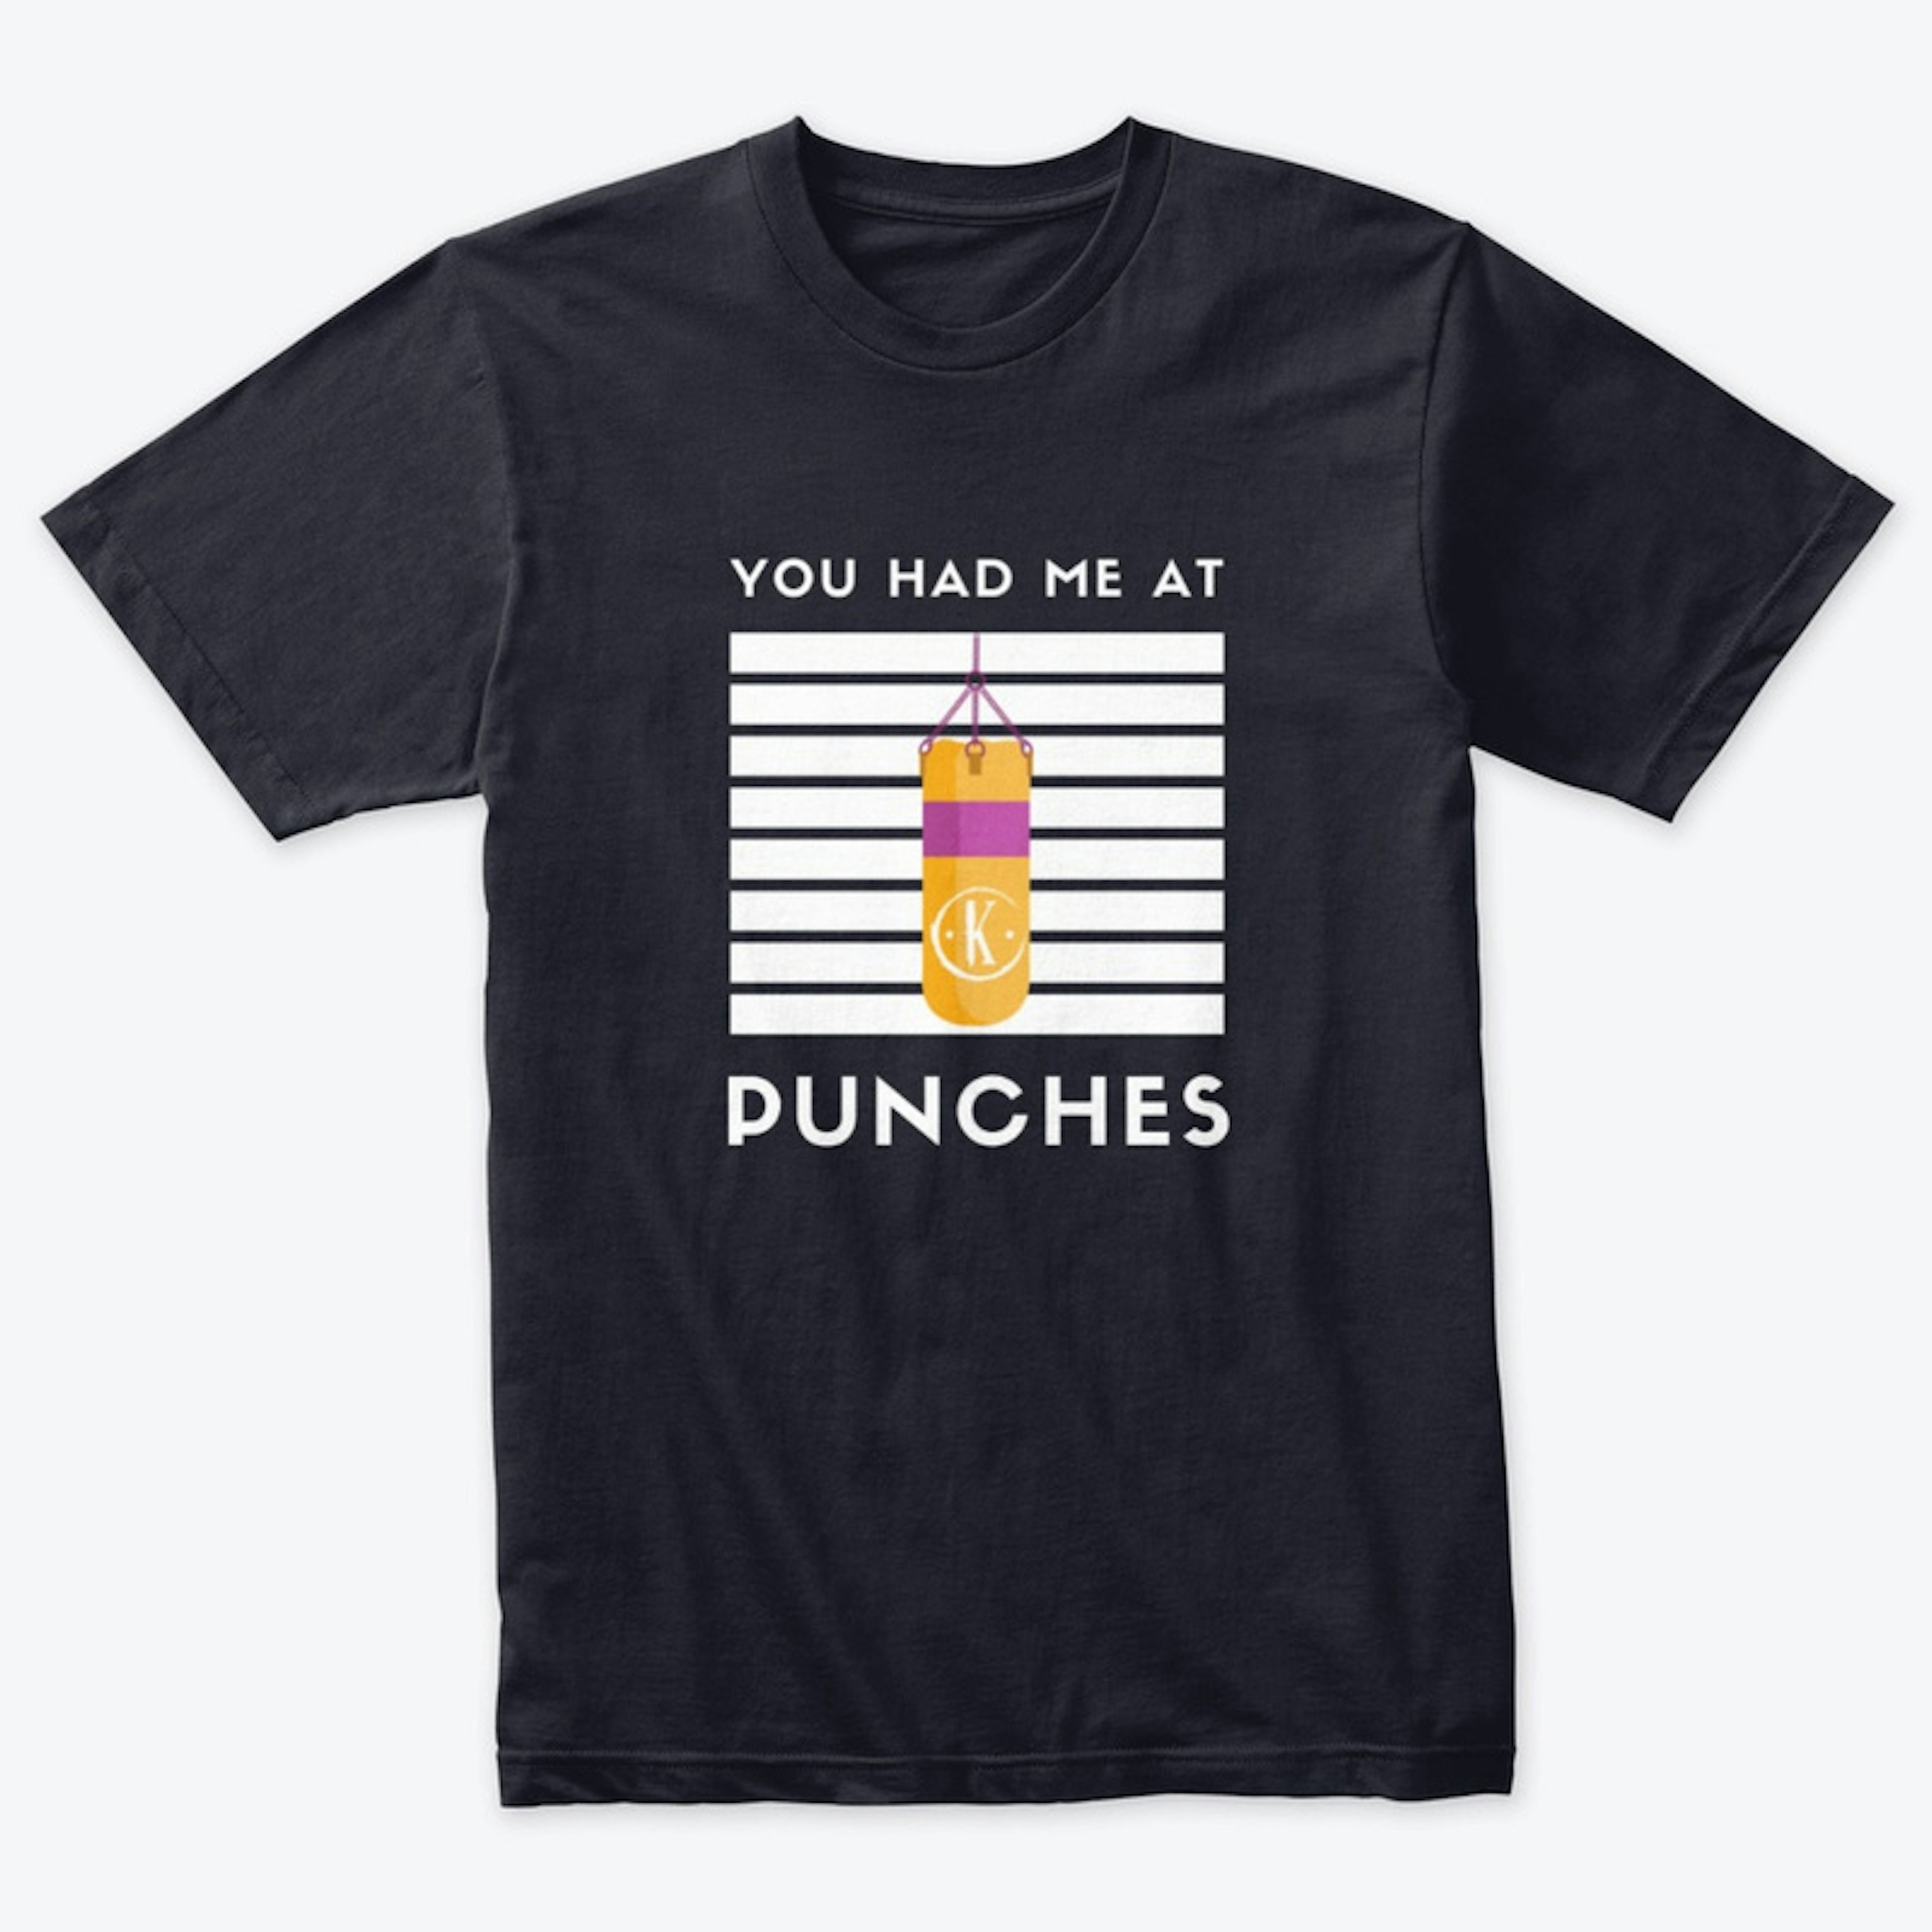 You Had Me At Punches... (Black or Navy)